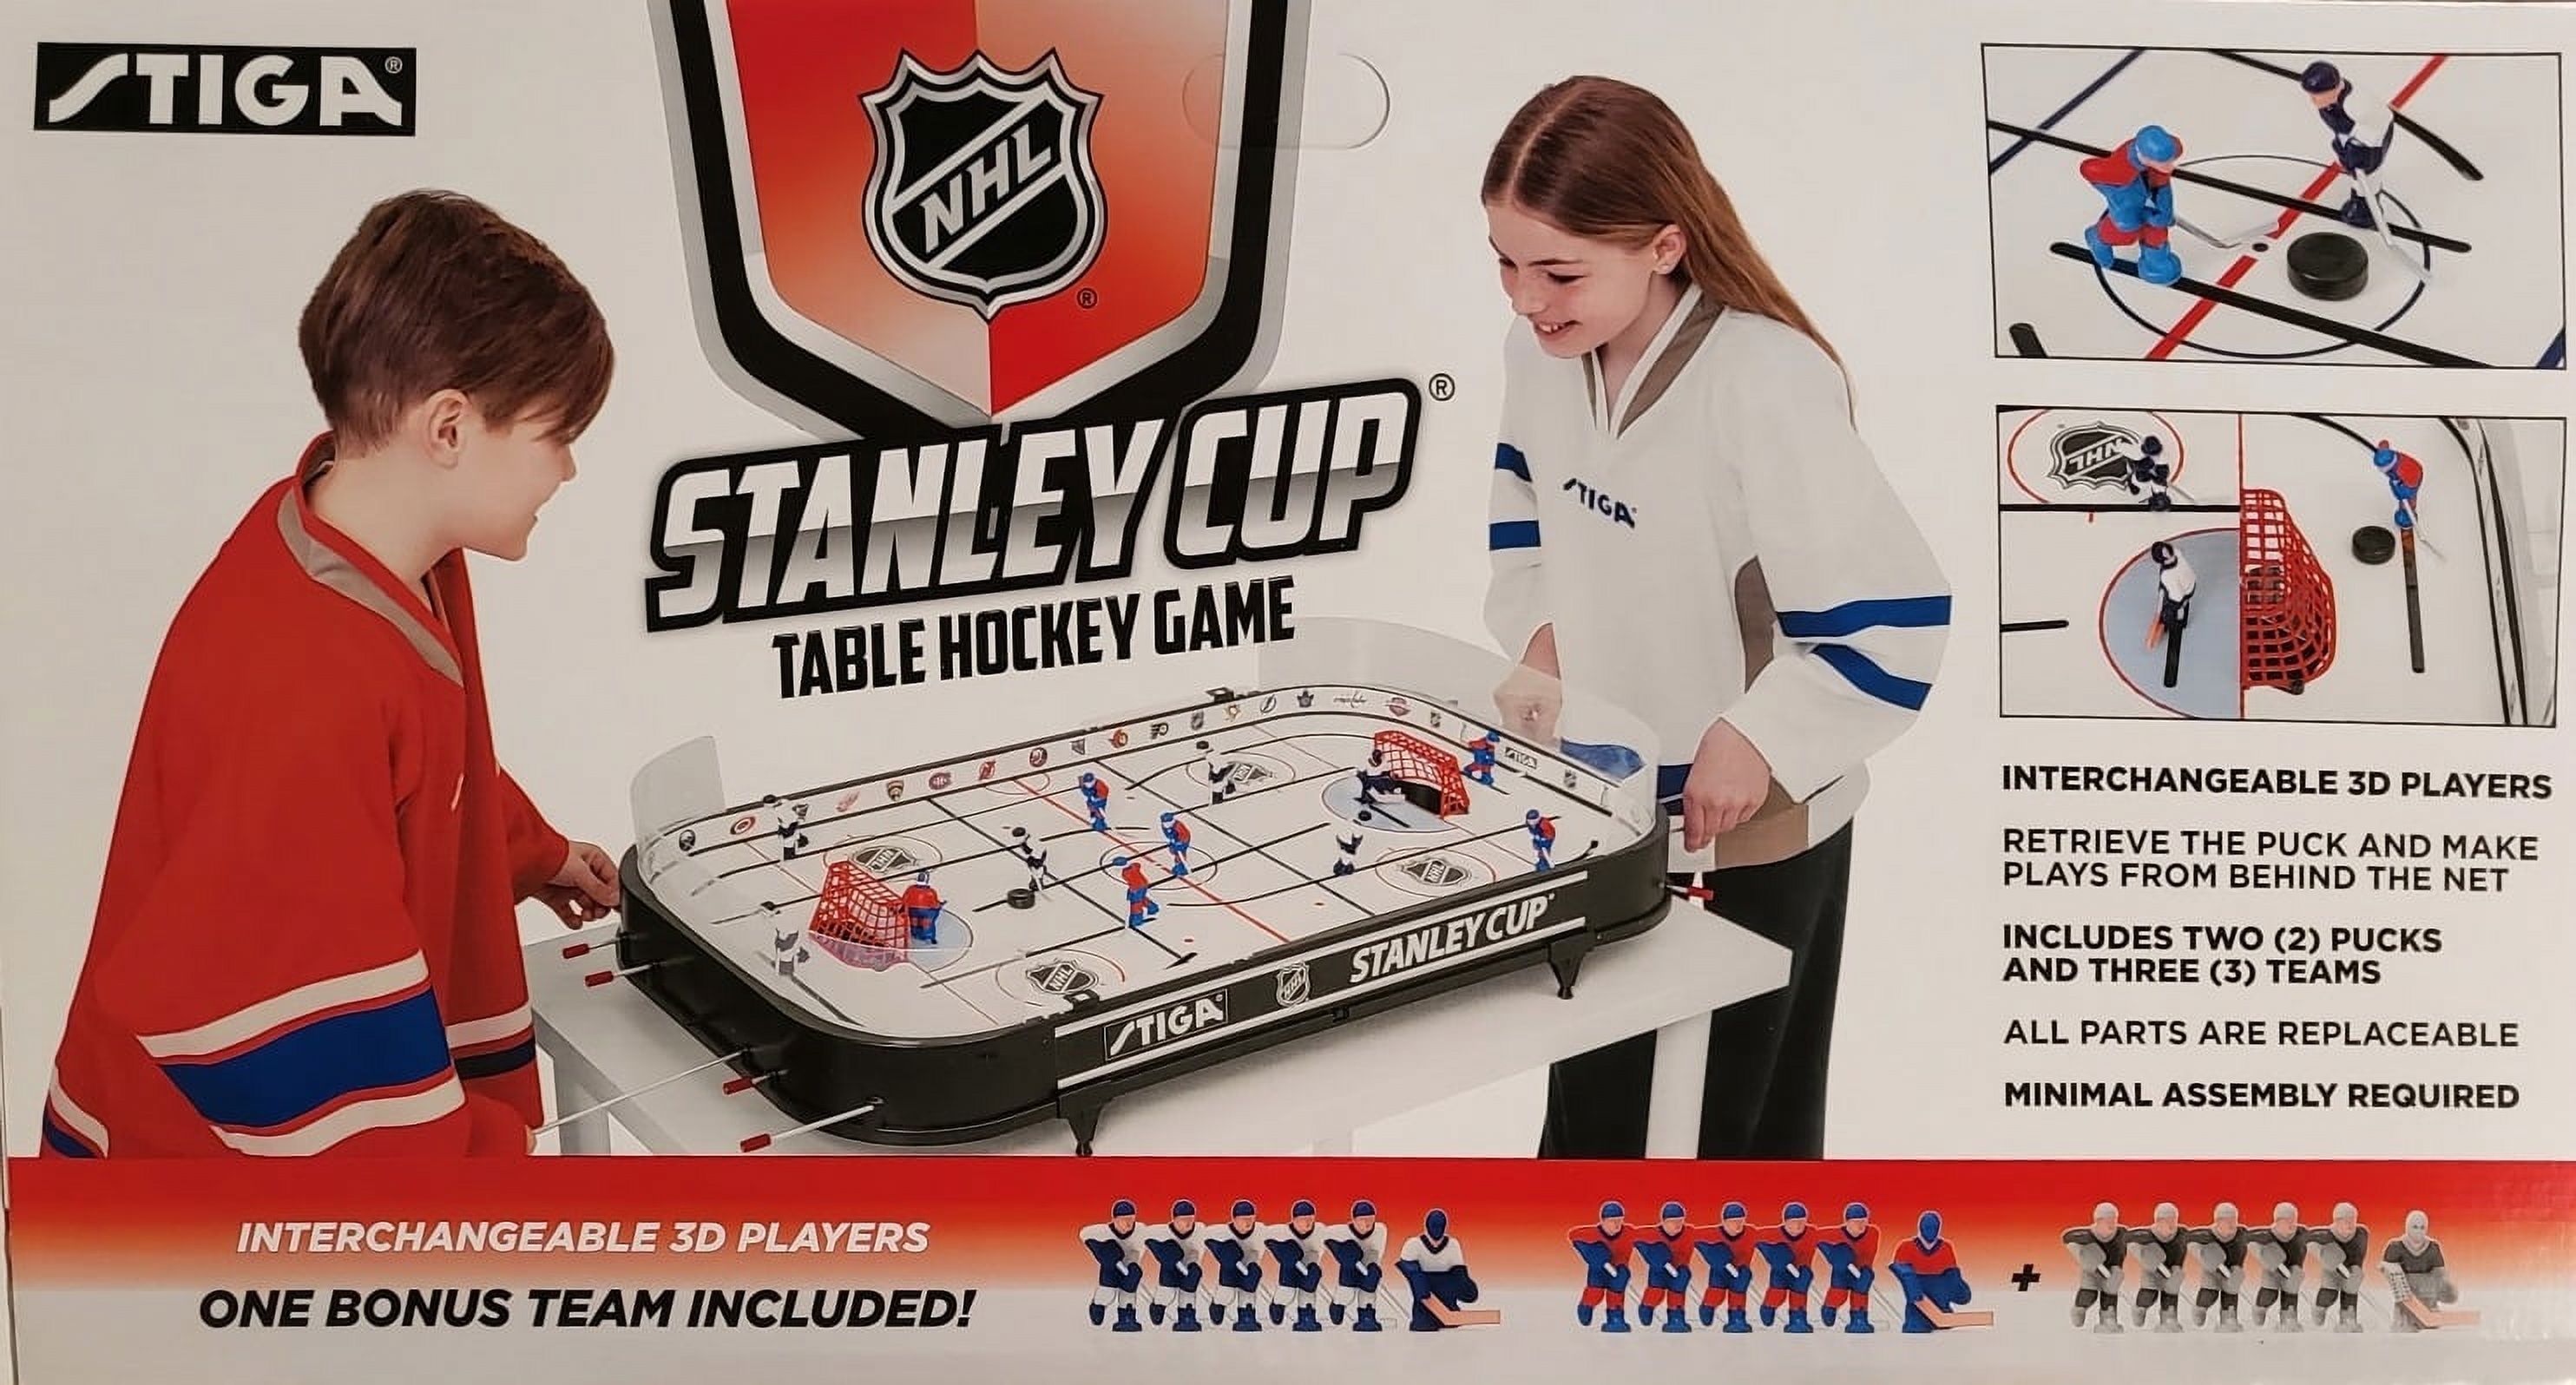 STIGA 3T NHL Stanley Cup Table Hockey Game - image 2 of 6